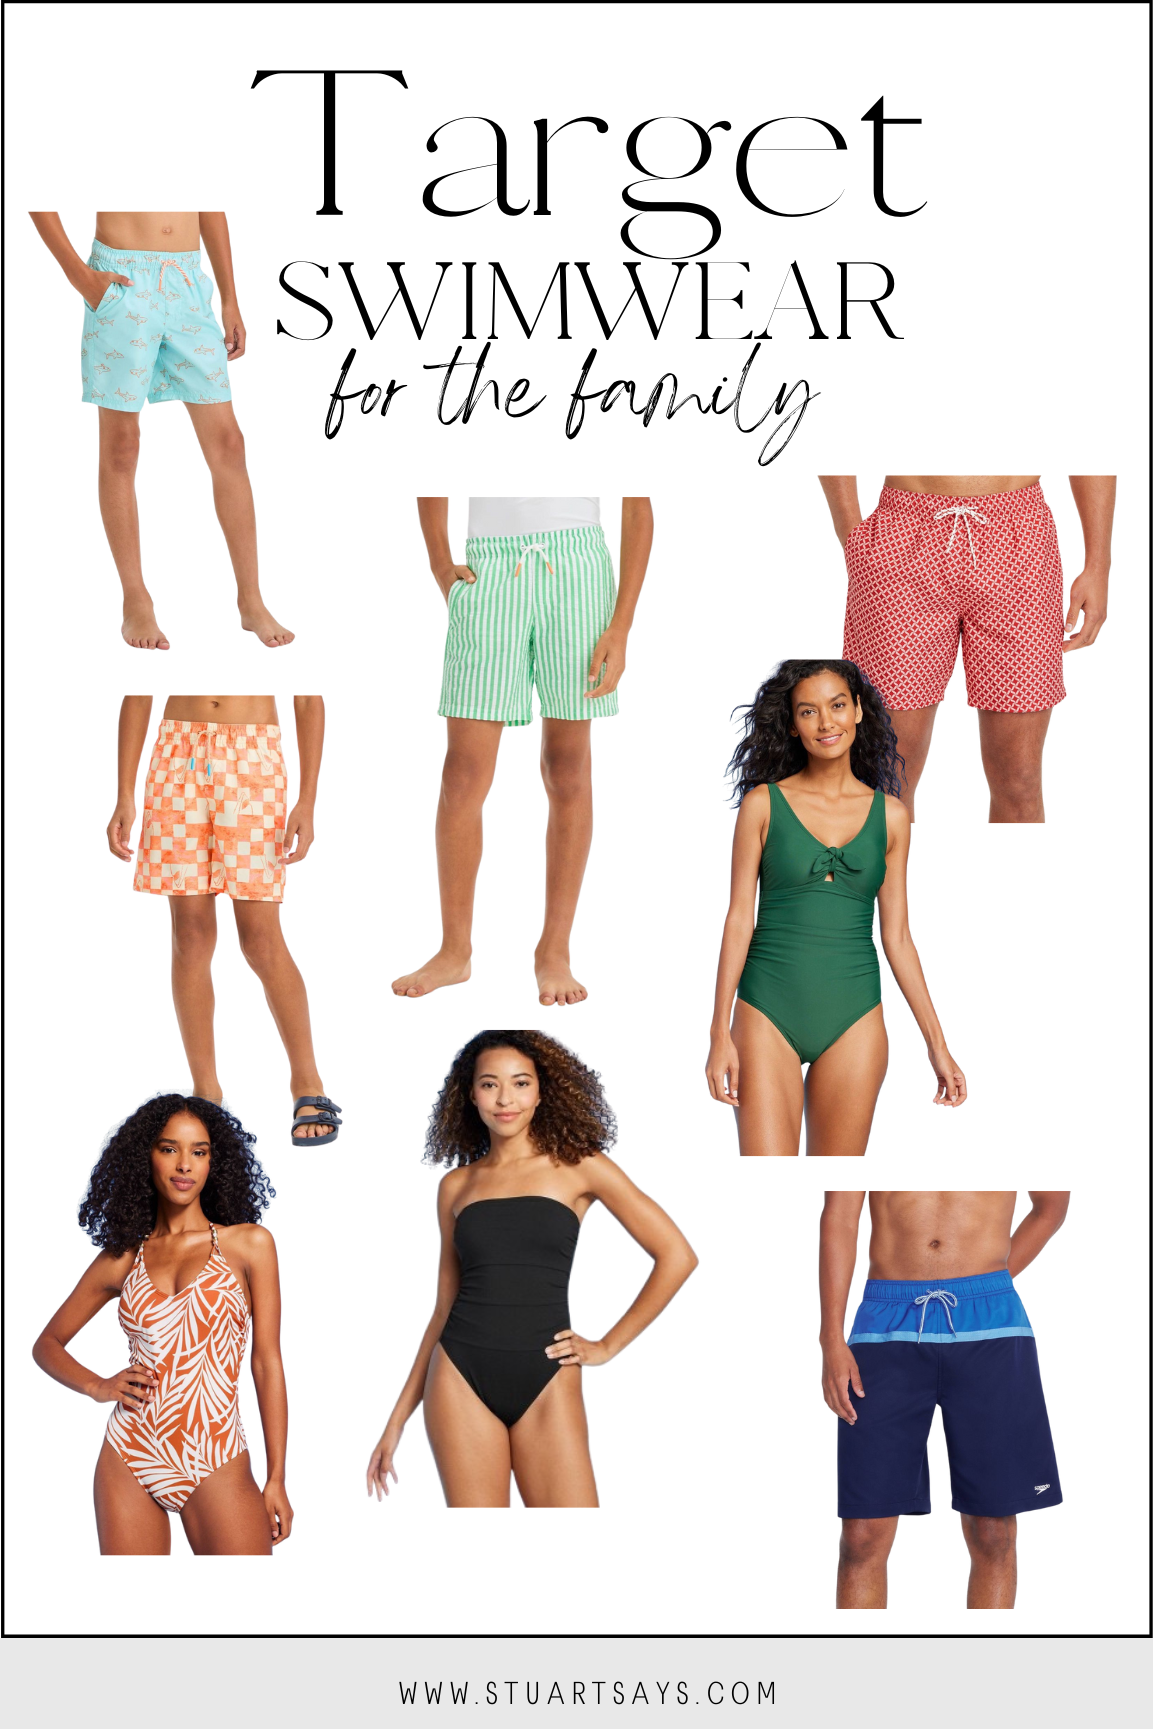 TARGET SWIMSUITS FOR THE WHOLE FAMILY